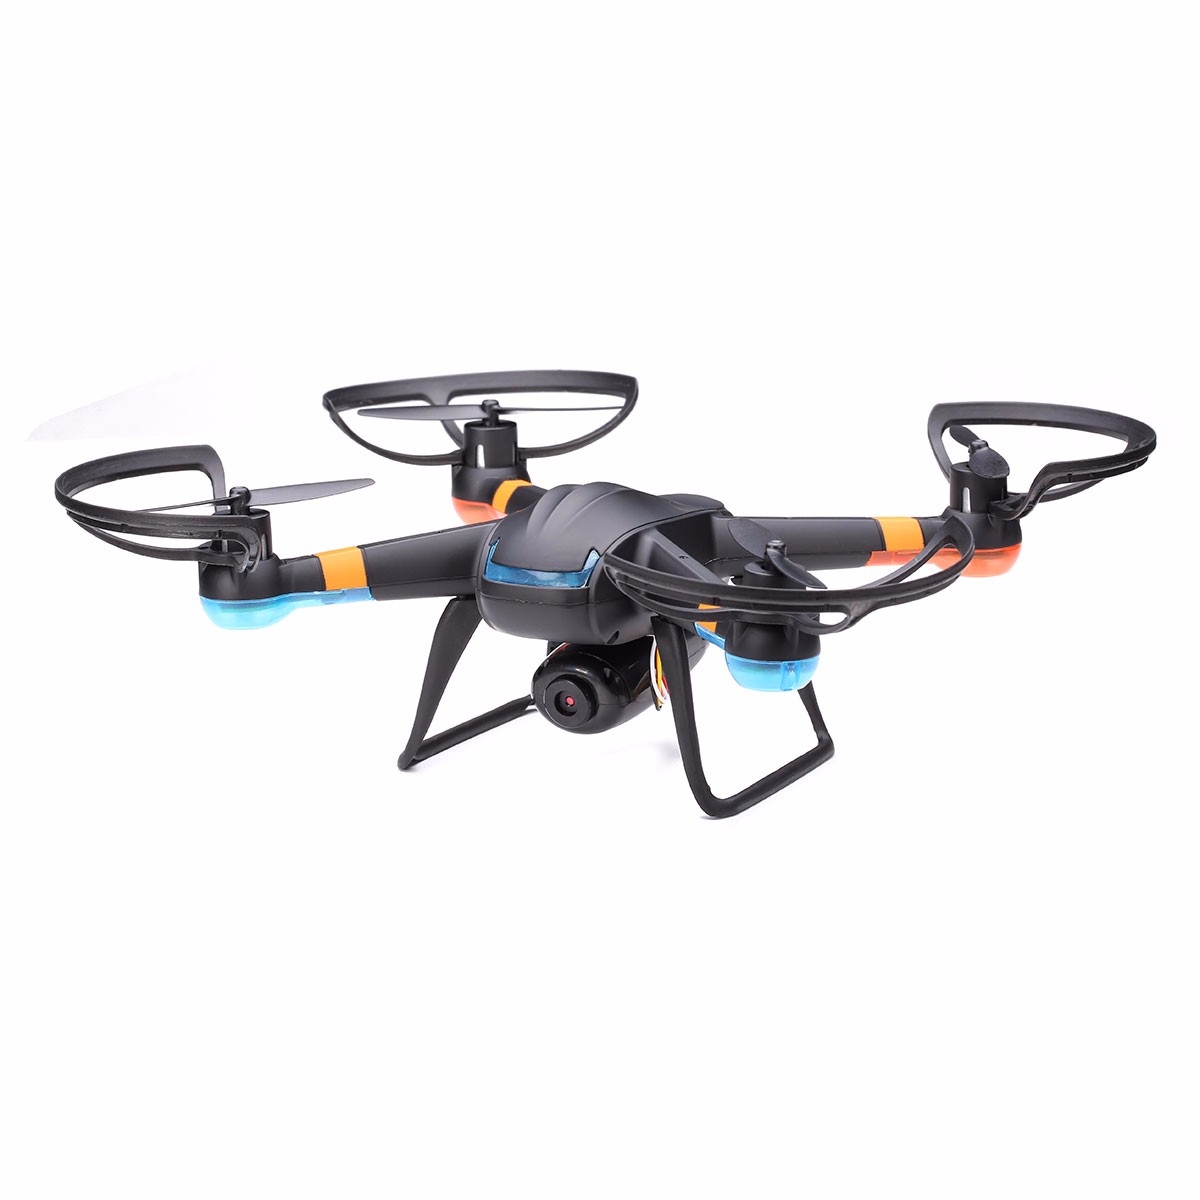 Global Drone GW007-1 Upgrade DM007 With 2.0MP HD Camera 2.4G 4CH 6 Axis One Key Return RC Quadcopter